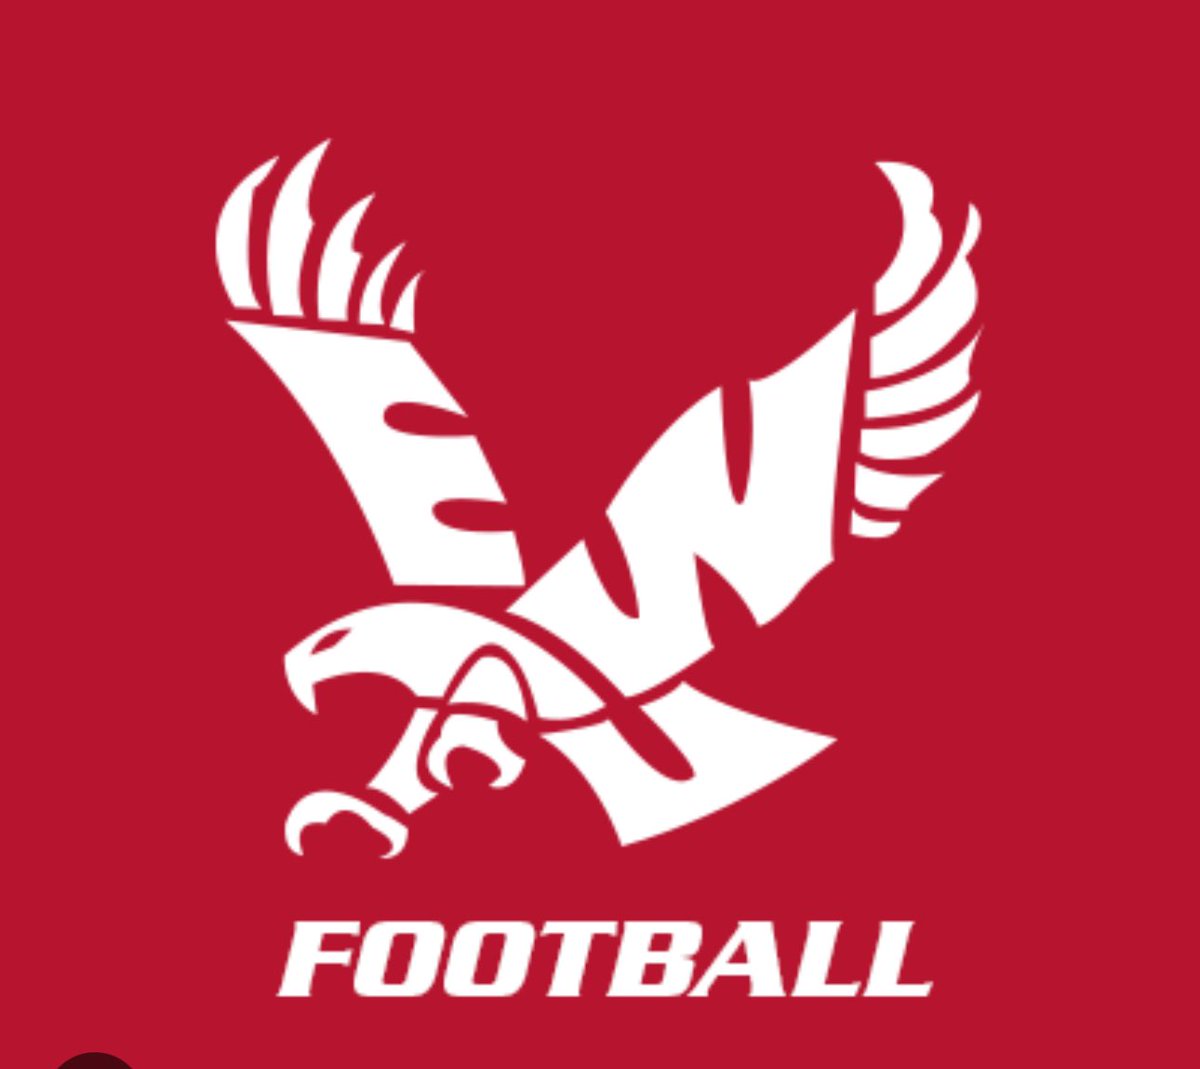 Big thanks to Coach @Coach_TMACK and @EWUFootball for stopping by and checking out our talented student athletes at Rodriguez HS. @BrandonHuffman @westcoastpreps_ @CoachTTMP @Nicoe_H__ @EWUFBRecruiting